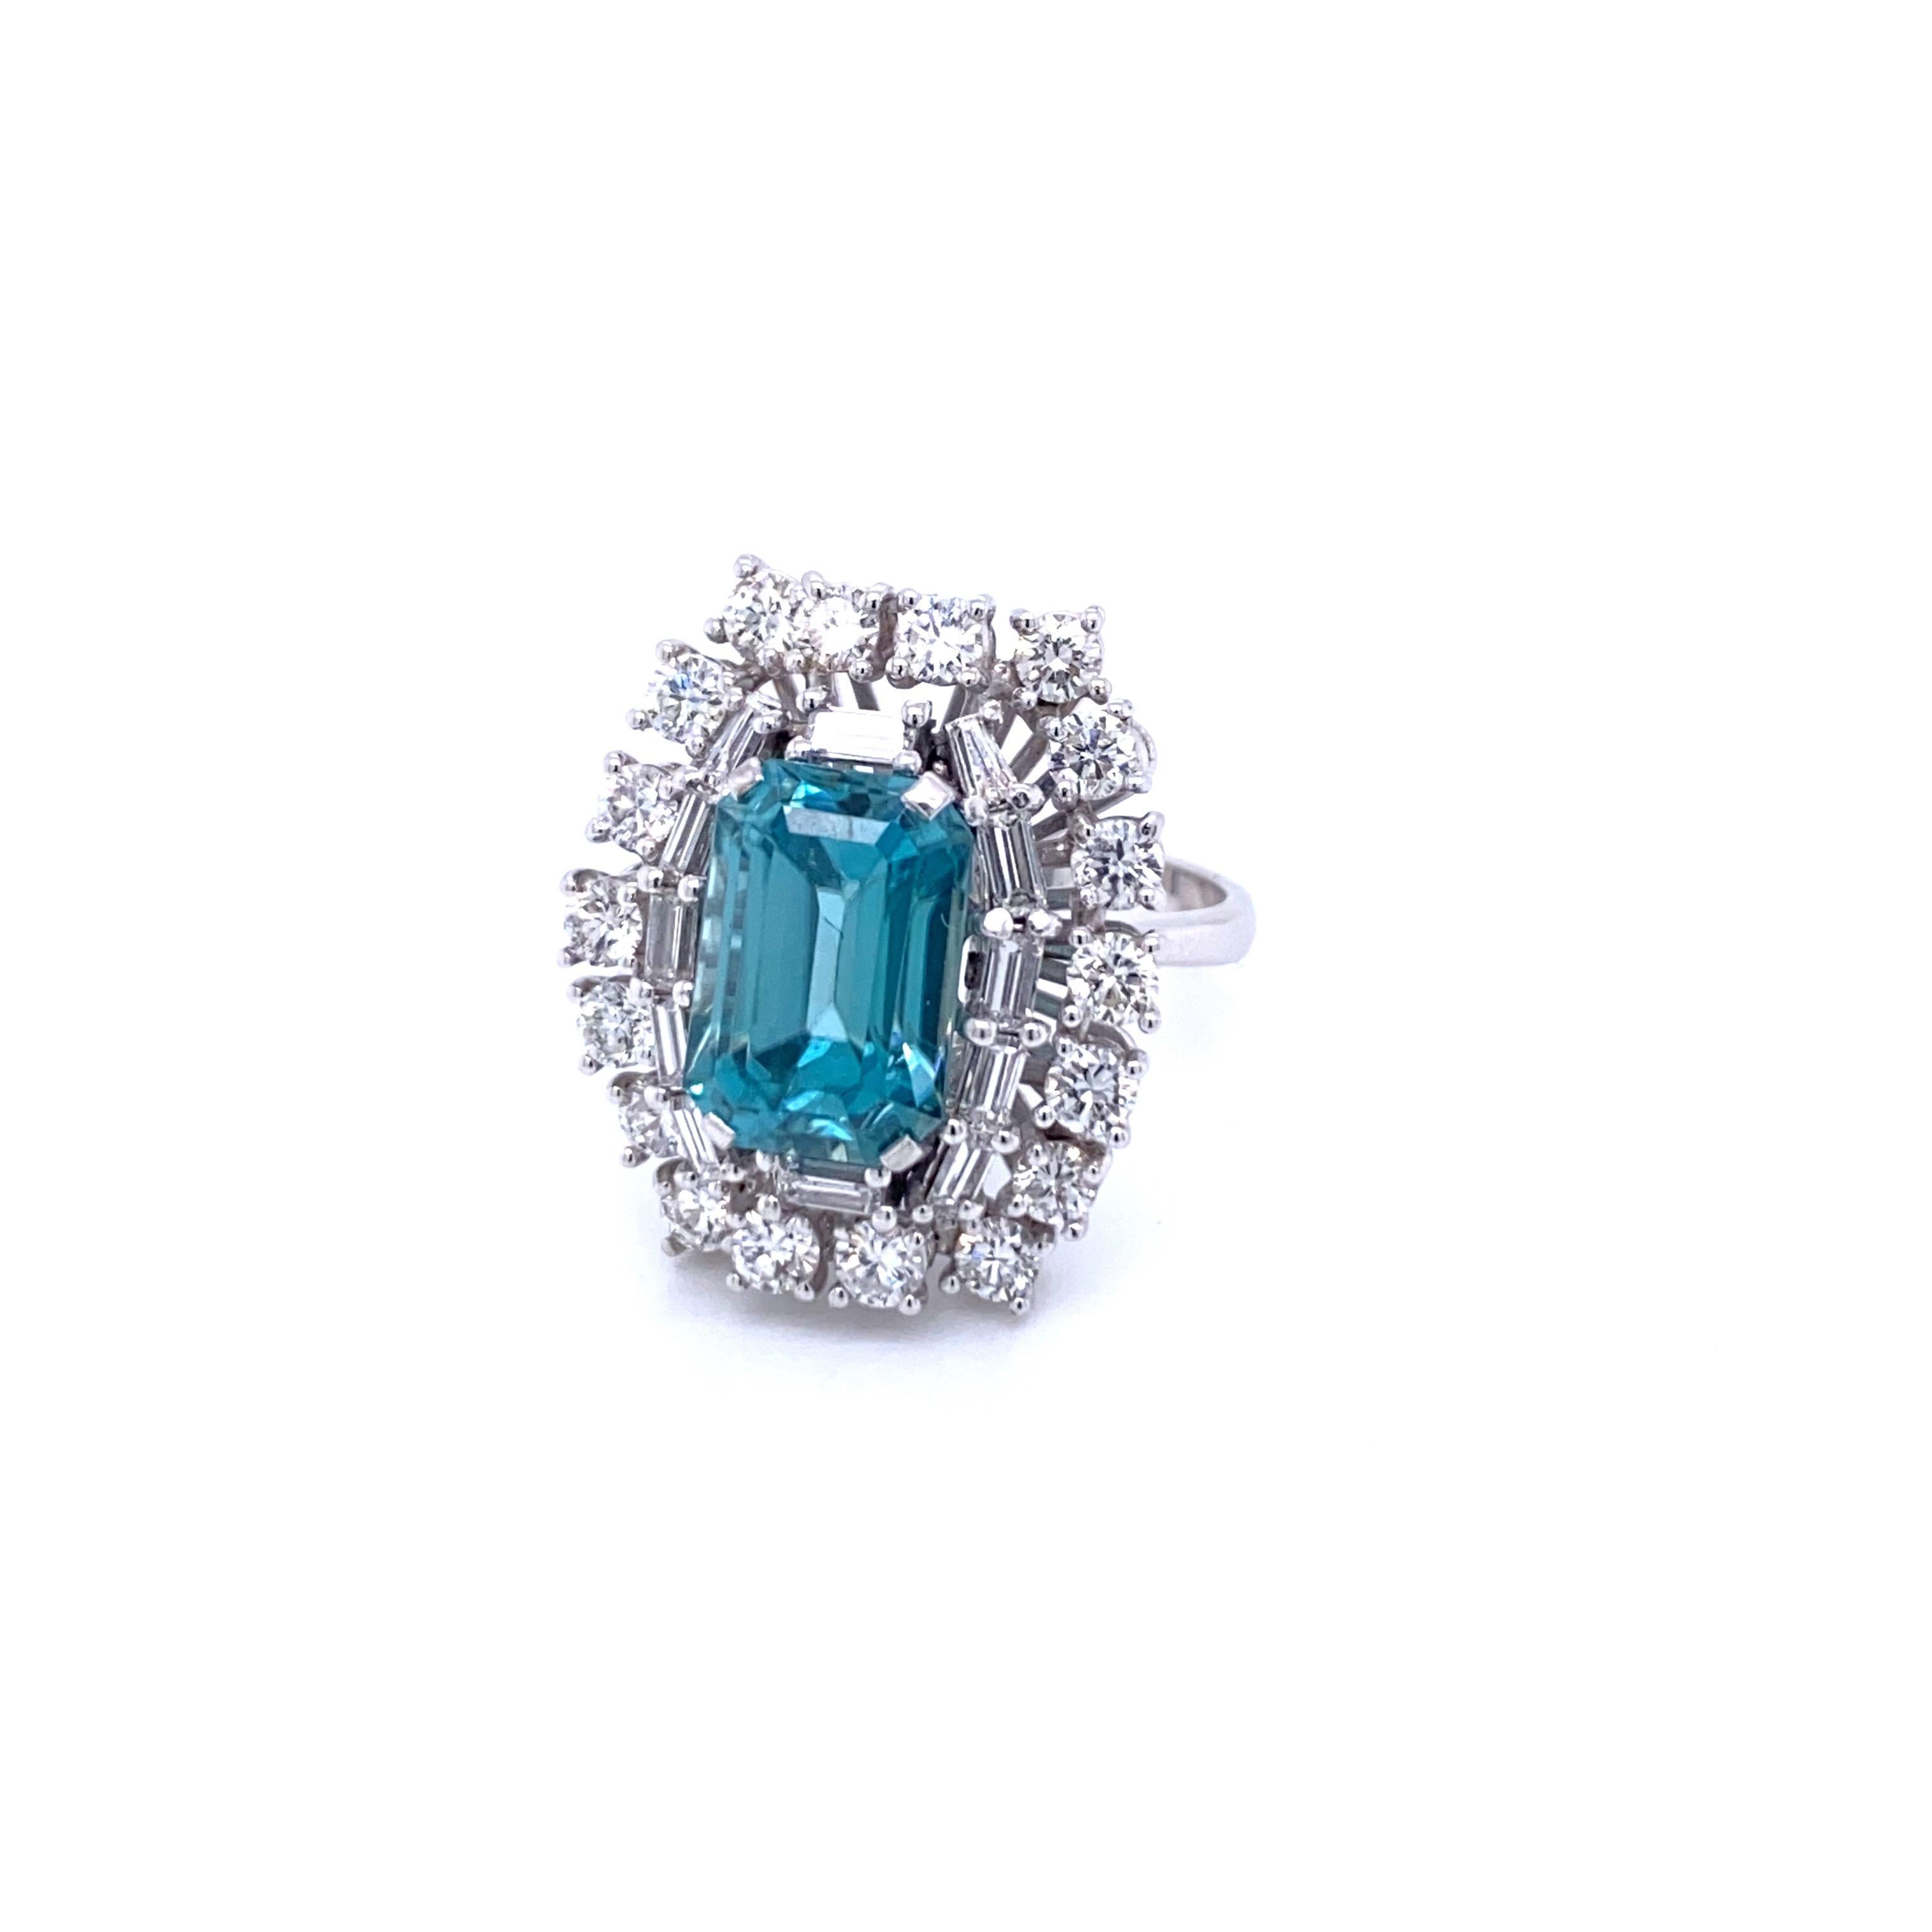 Fine and unusual cocktail ring centering an emerald cut Natural Blu Zircon, weighing approx. 5.00 carat, flanked by 1.80 carats of Sparkling baguette and round brilliant cut Diamonds, graded G color VVS. All set in 18K white gold.

CONDITION: